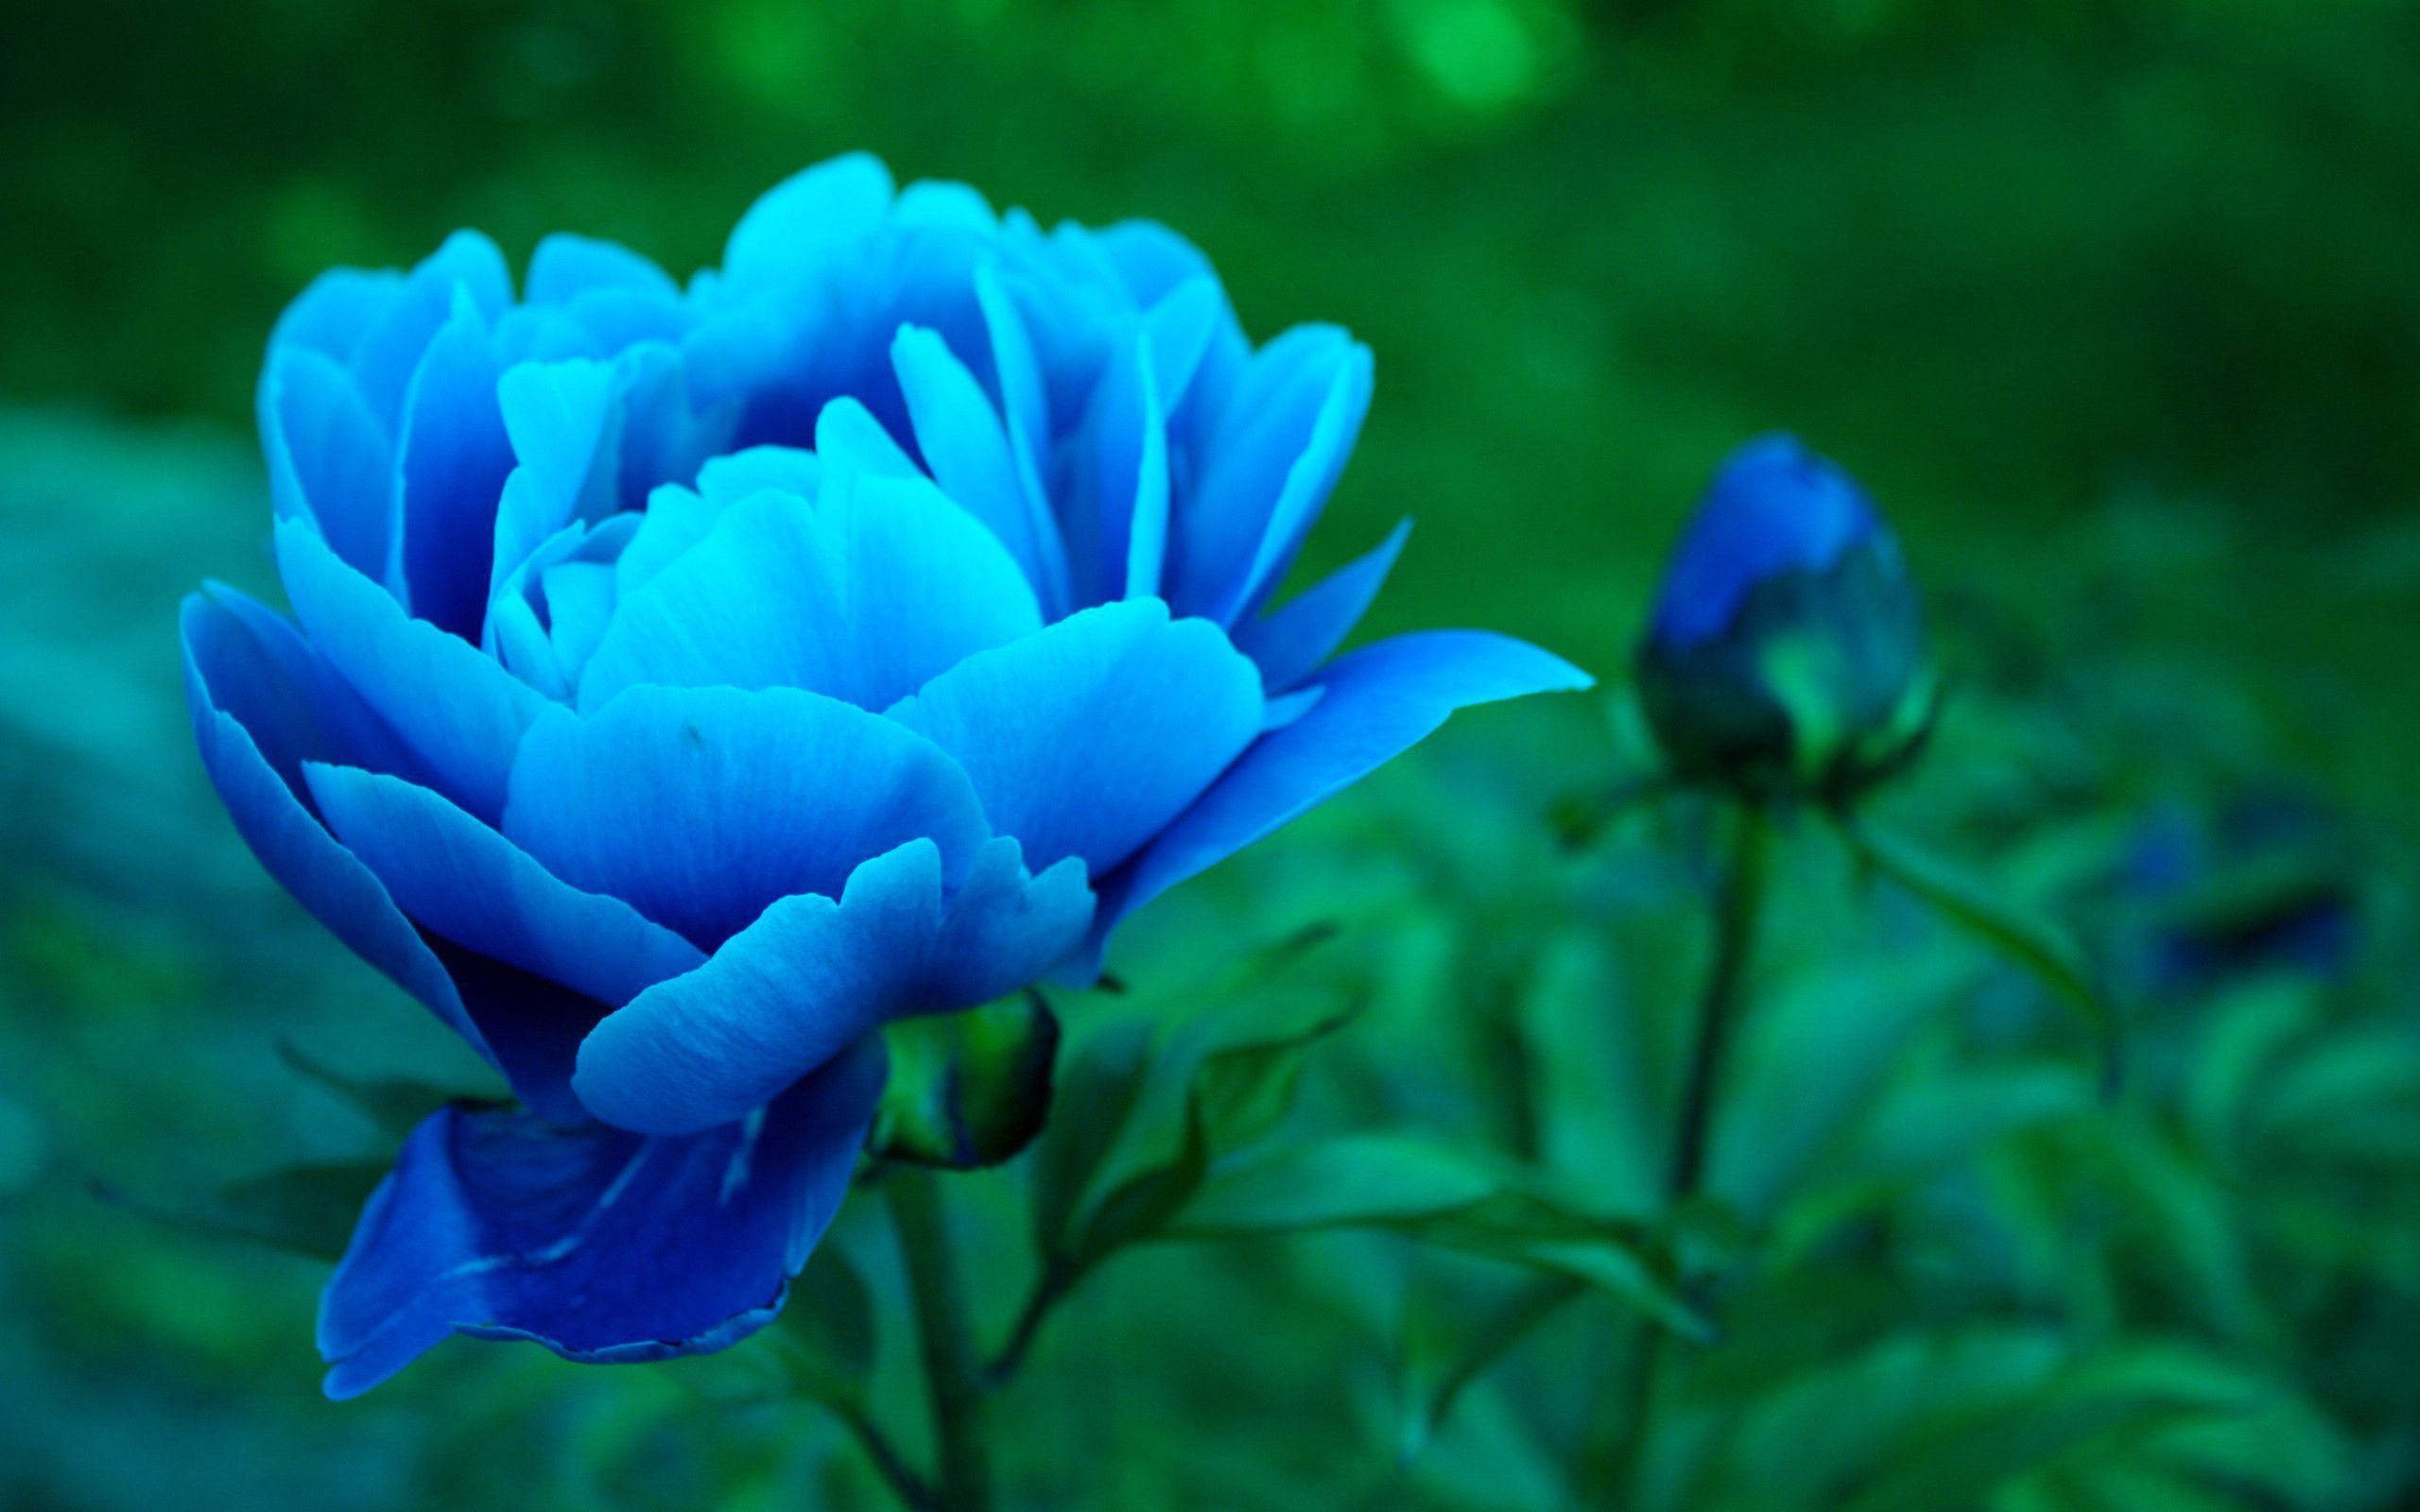 Lovely Peony Wallpaper 31260 2560x1600 px